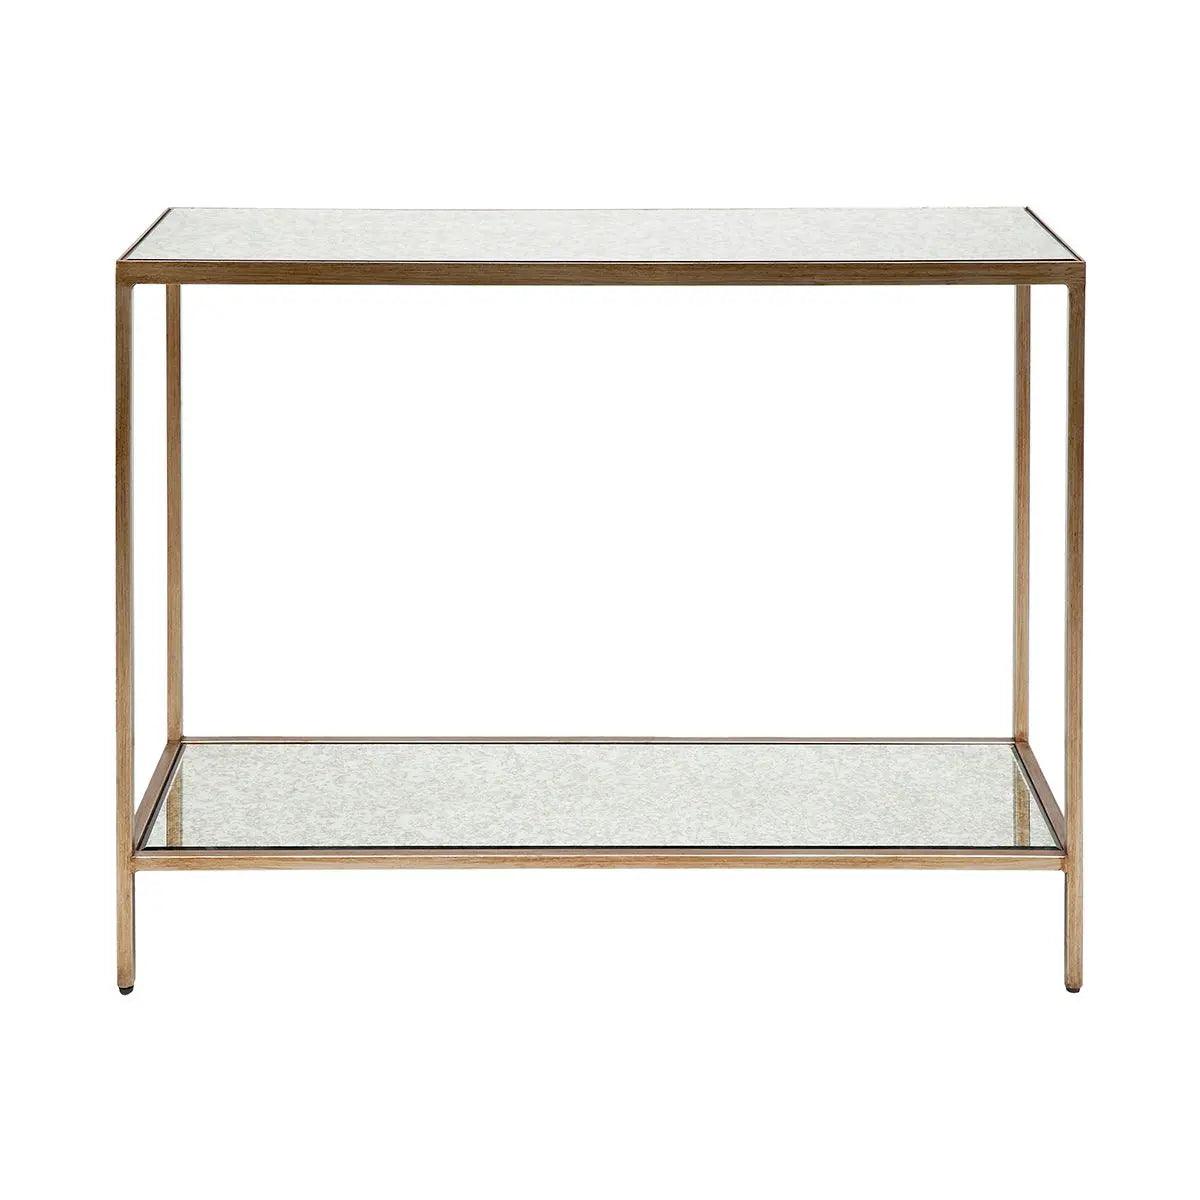 Cafe Lighting & Living Cocktail Mirrored Console Table - Small Antique Gold - Console Table322169320294115527 1